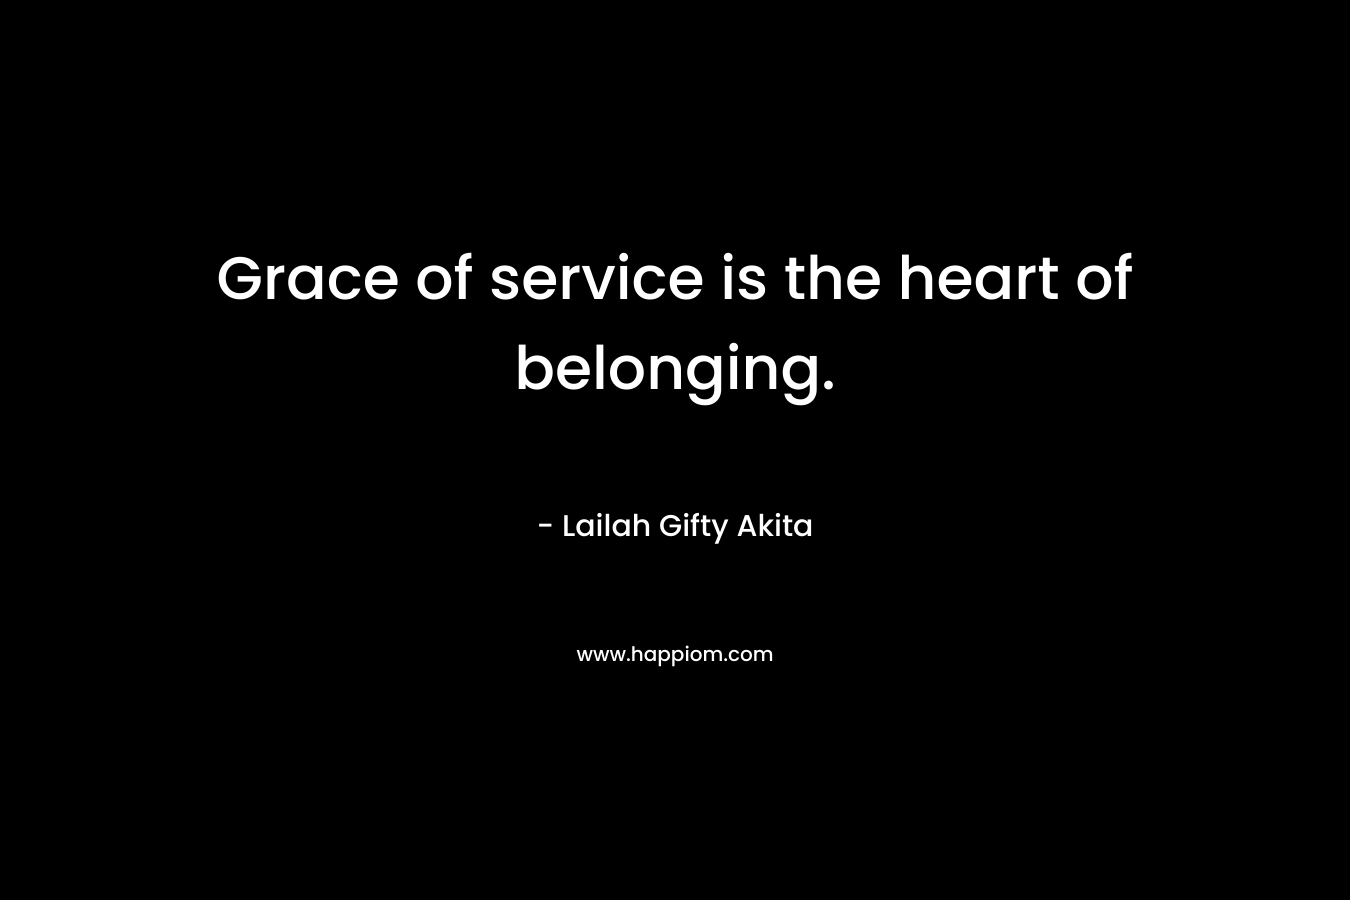 Grace of service is the heart of belonging.